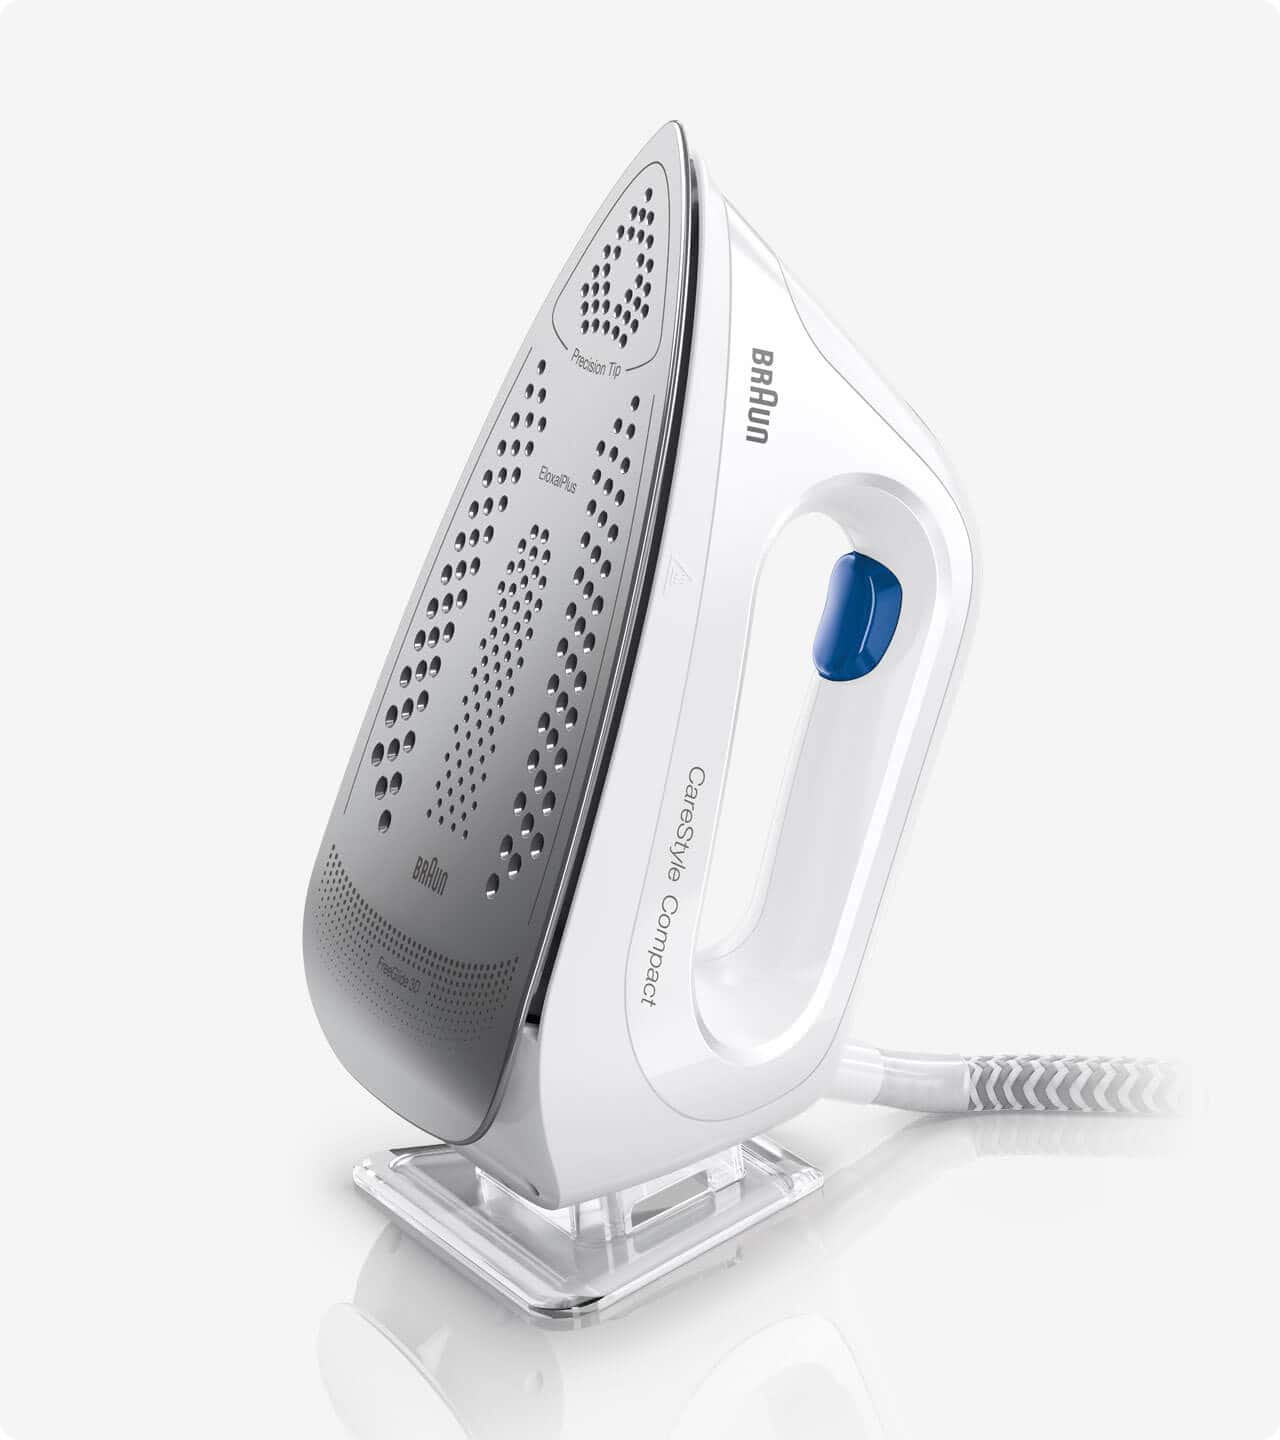 Save 50% time with Braun's CareStyle Compact